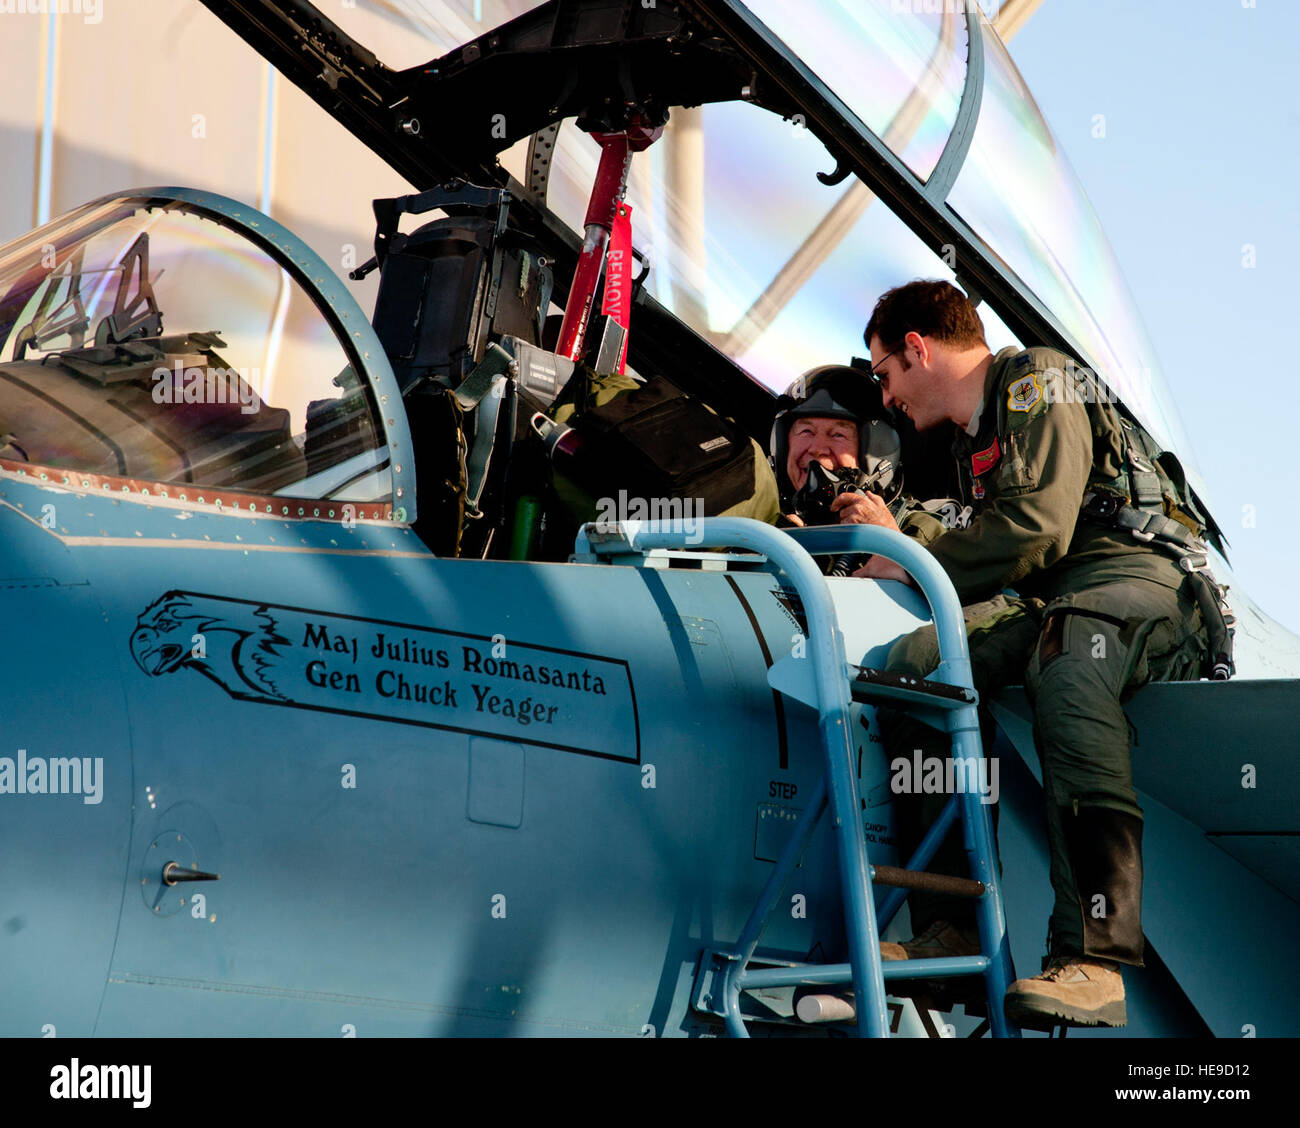 Retired United States Air Force Brig. Gen. Charles E. 'Chuck' Yeager and Capt. David Vincent, 65th Aggressor Squadron pilot, prepare for their flight in an F-15D Eagle Oct. 14, 2012, at Nellis Air Force Base, Nev. Yeager and Vincent are commemorating the 65th anniversary of Yeager's historic breaking of the sound barrier flight Oct. 14, 1947, in the Bell XS-1 rocket research plane named 'Glamorous Glennis.'  Master Sgt. Jason W. Edwards) Stock Photo